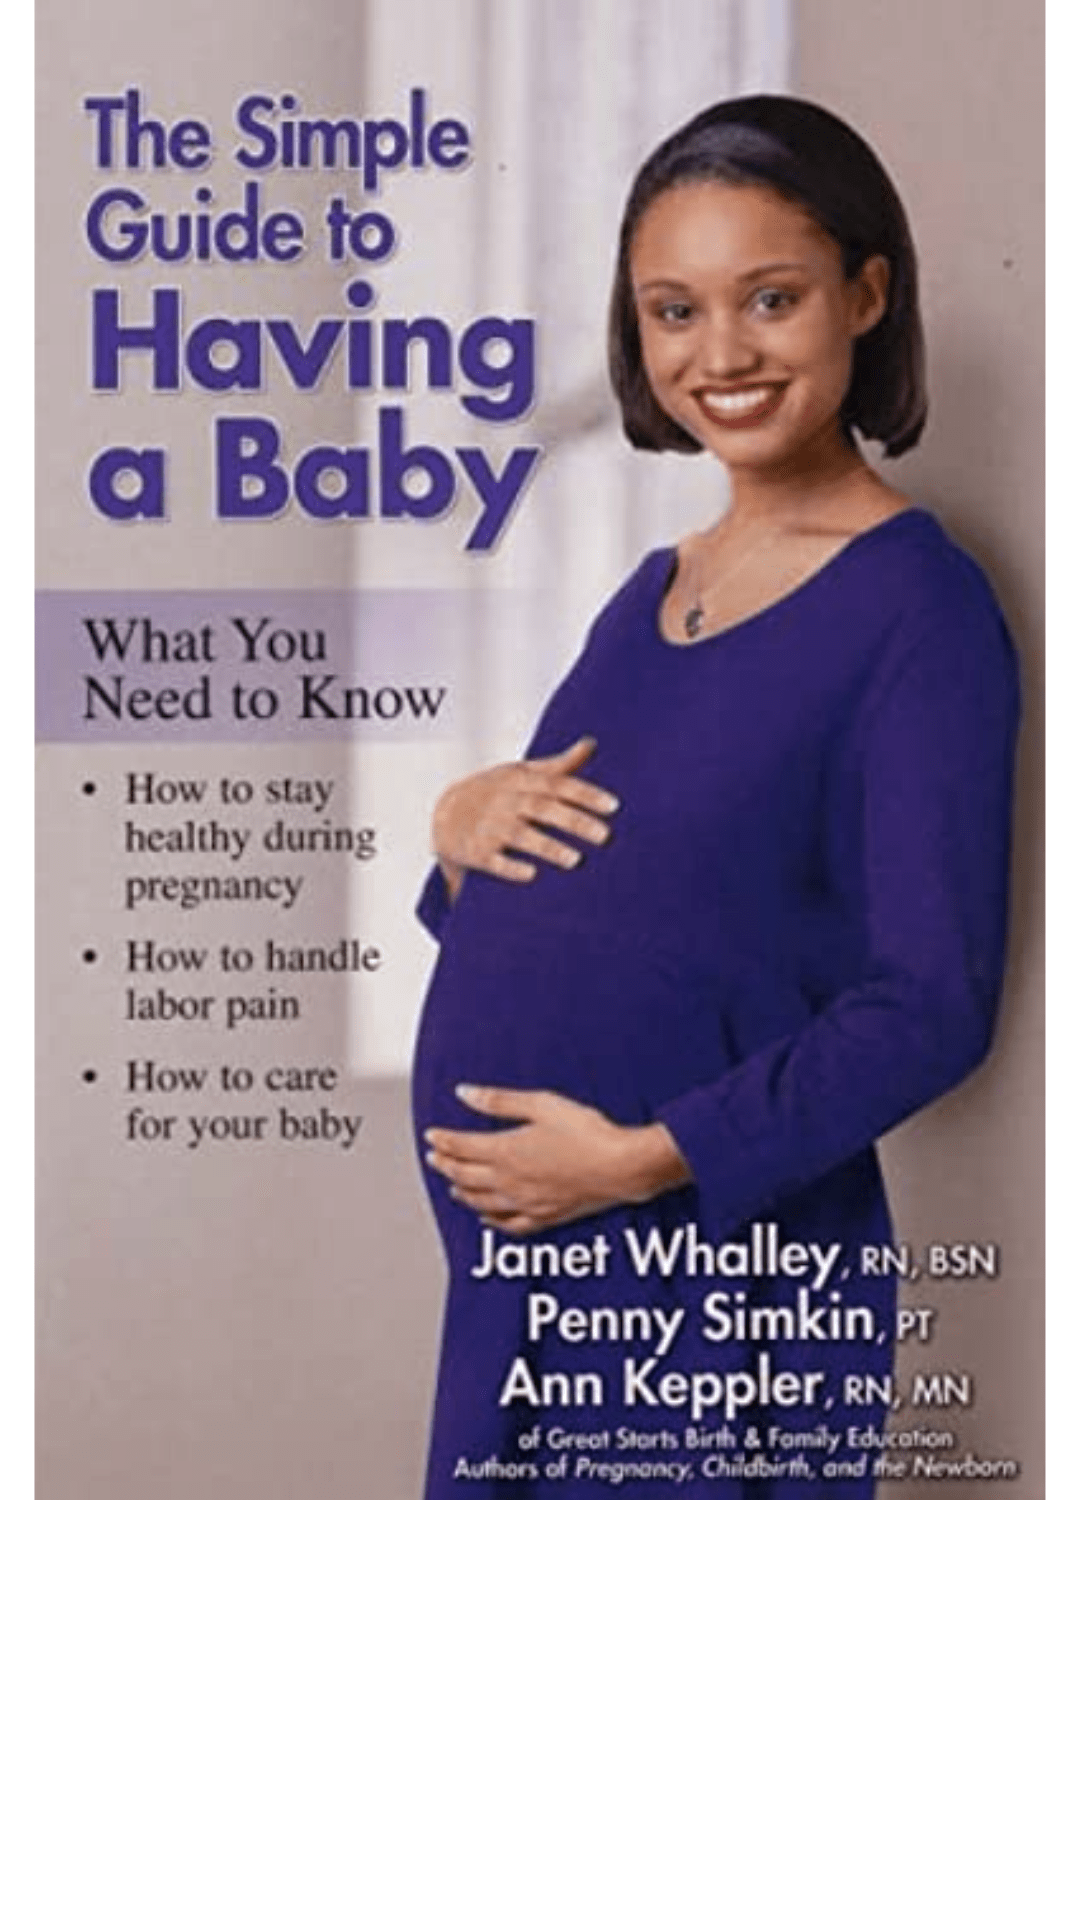 The Simple Guide to Having a Baby: A Step-by-Step Illustrated Guide to Pregnancy and Childbirth